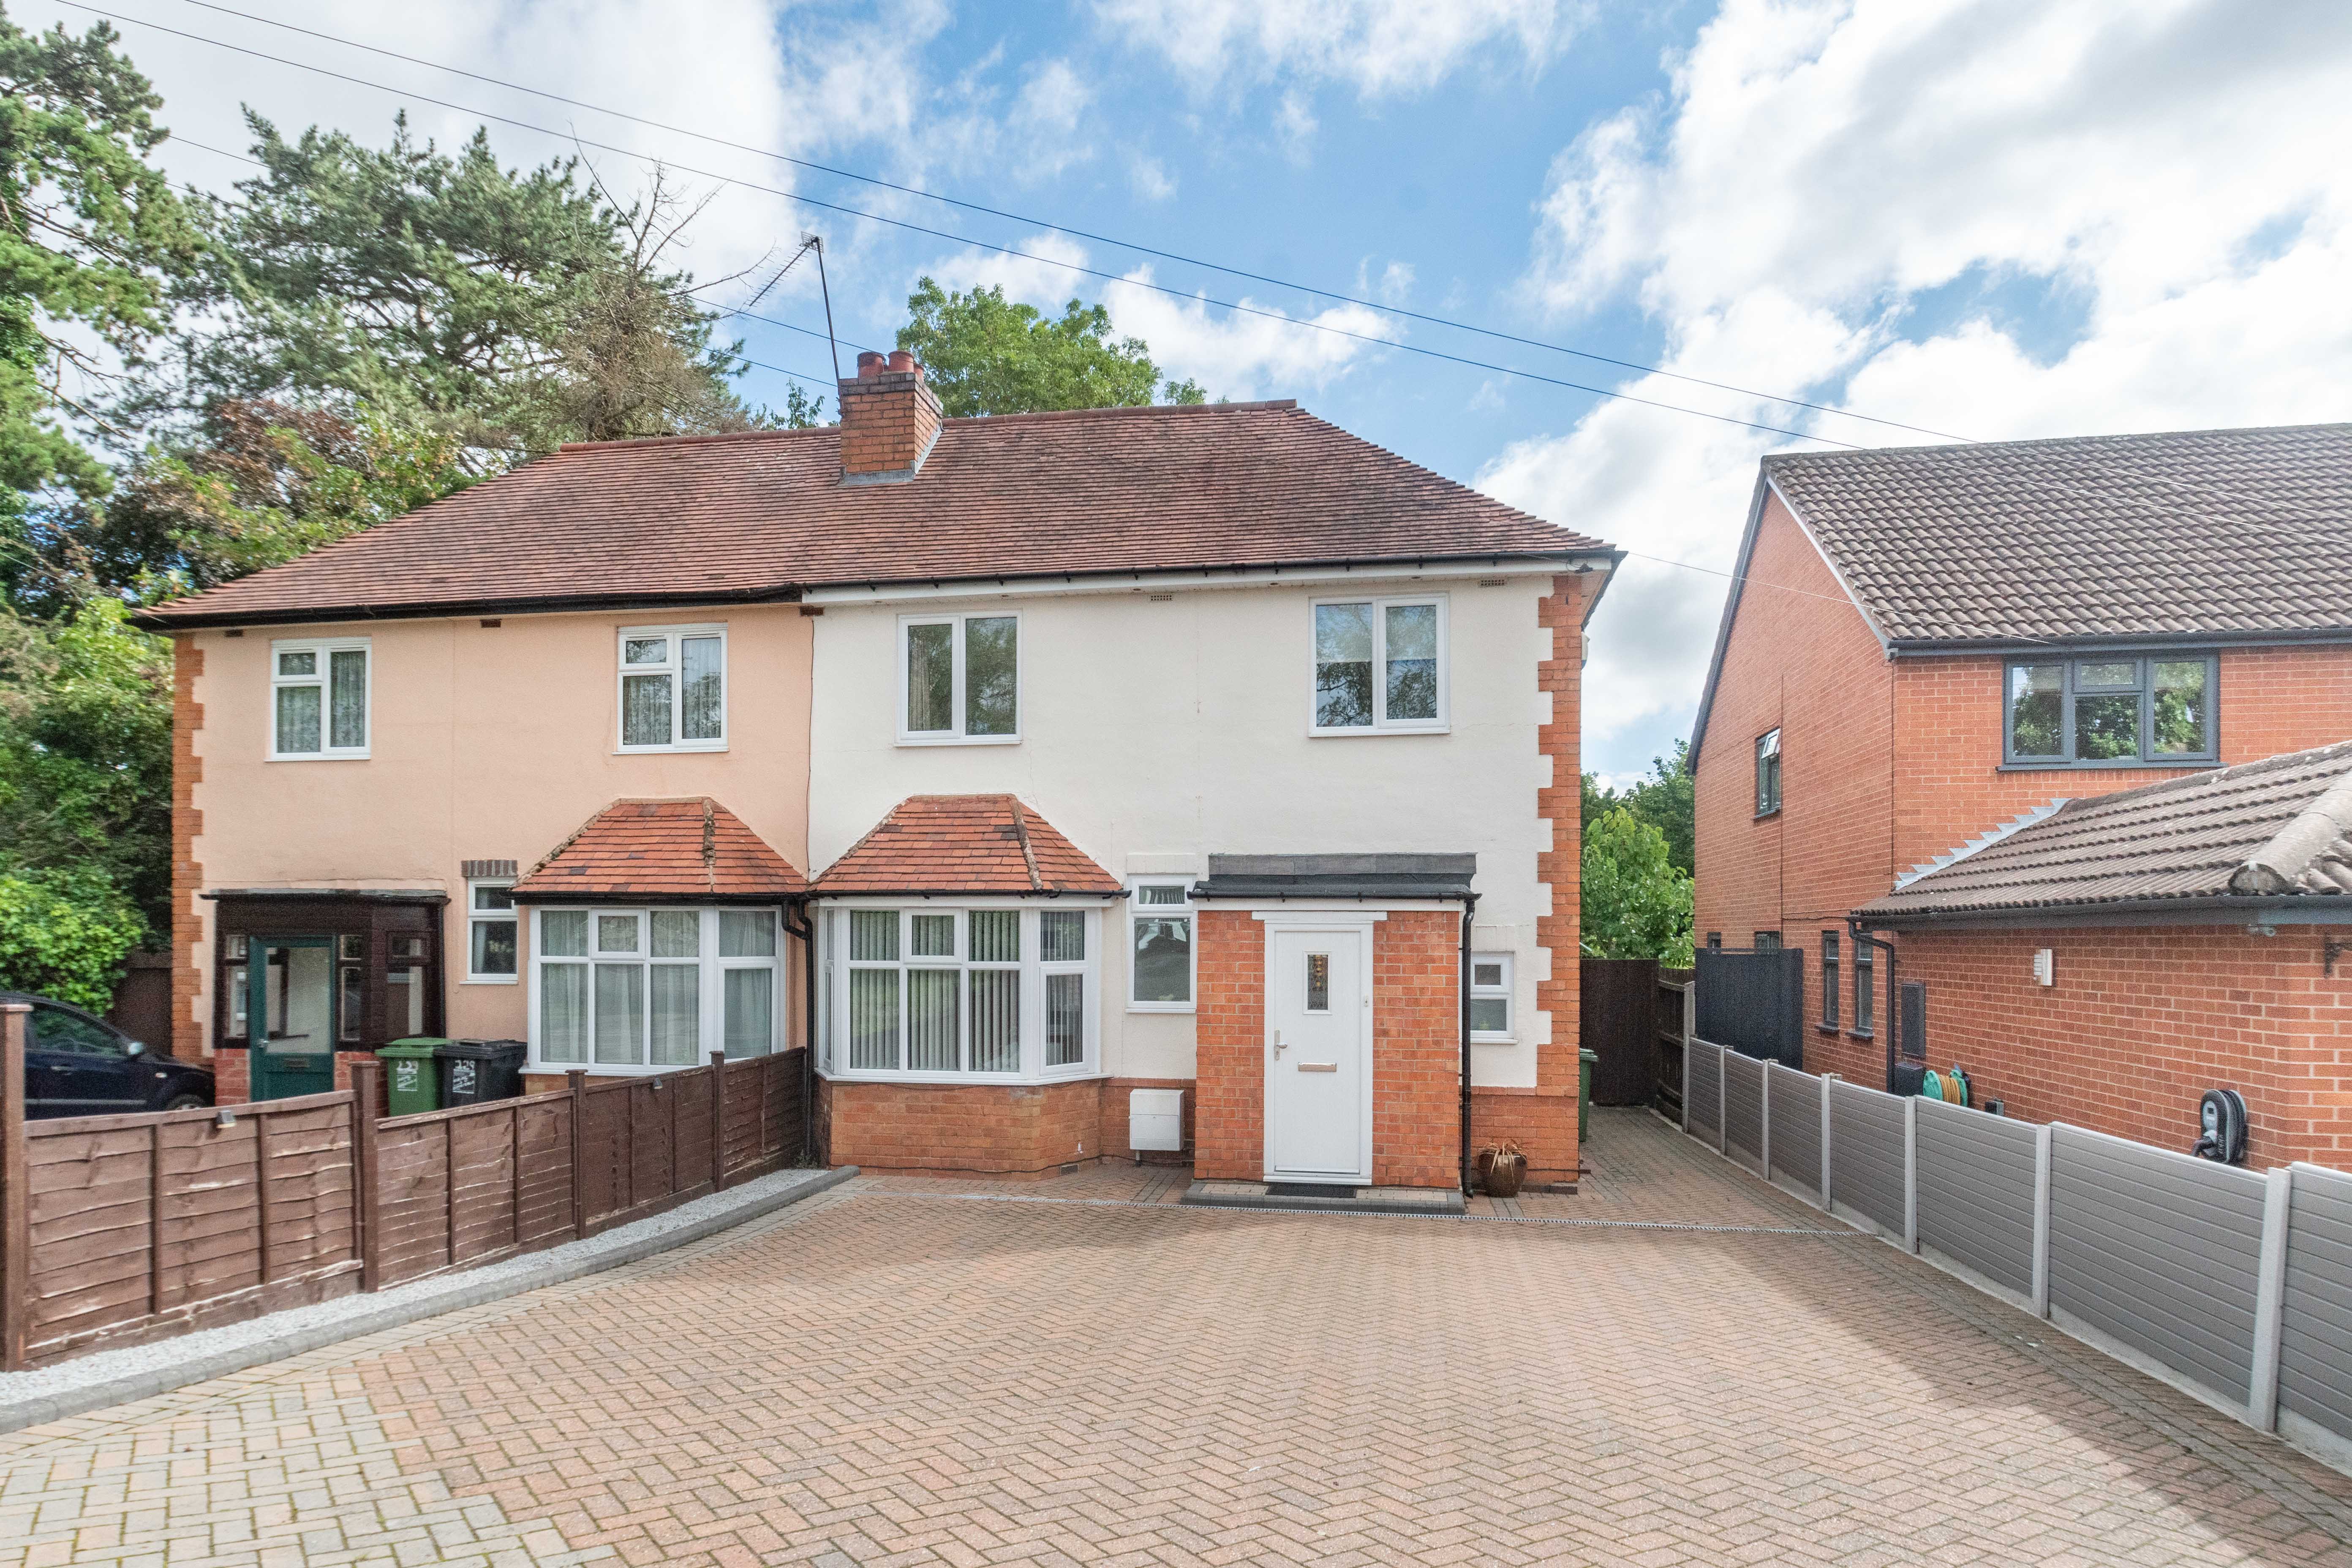 3 bed house for sale in Evesham Road, Redditch - Property Image 1